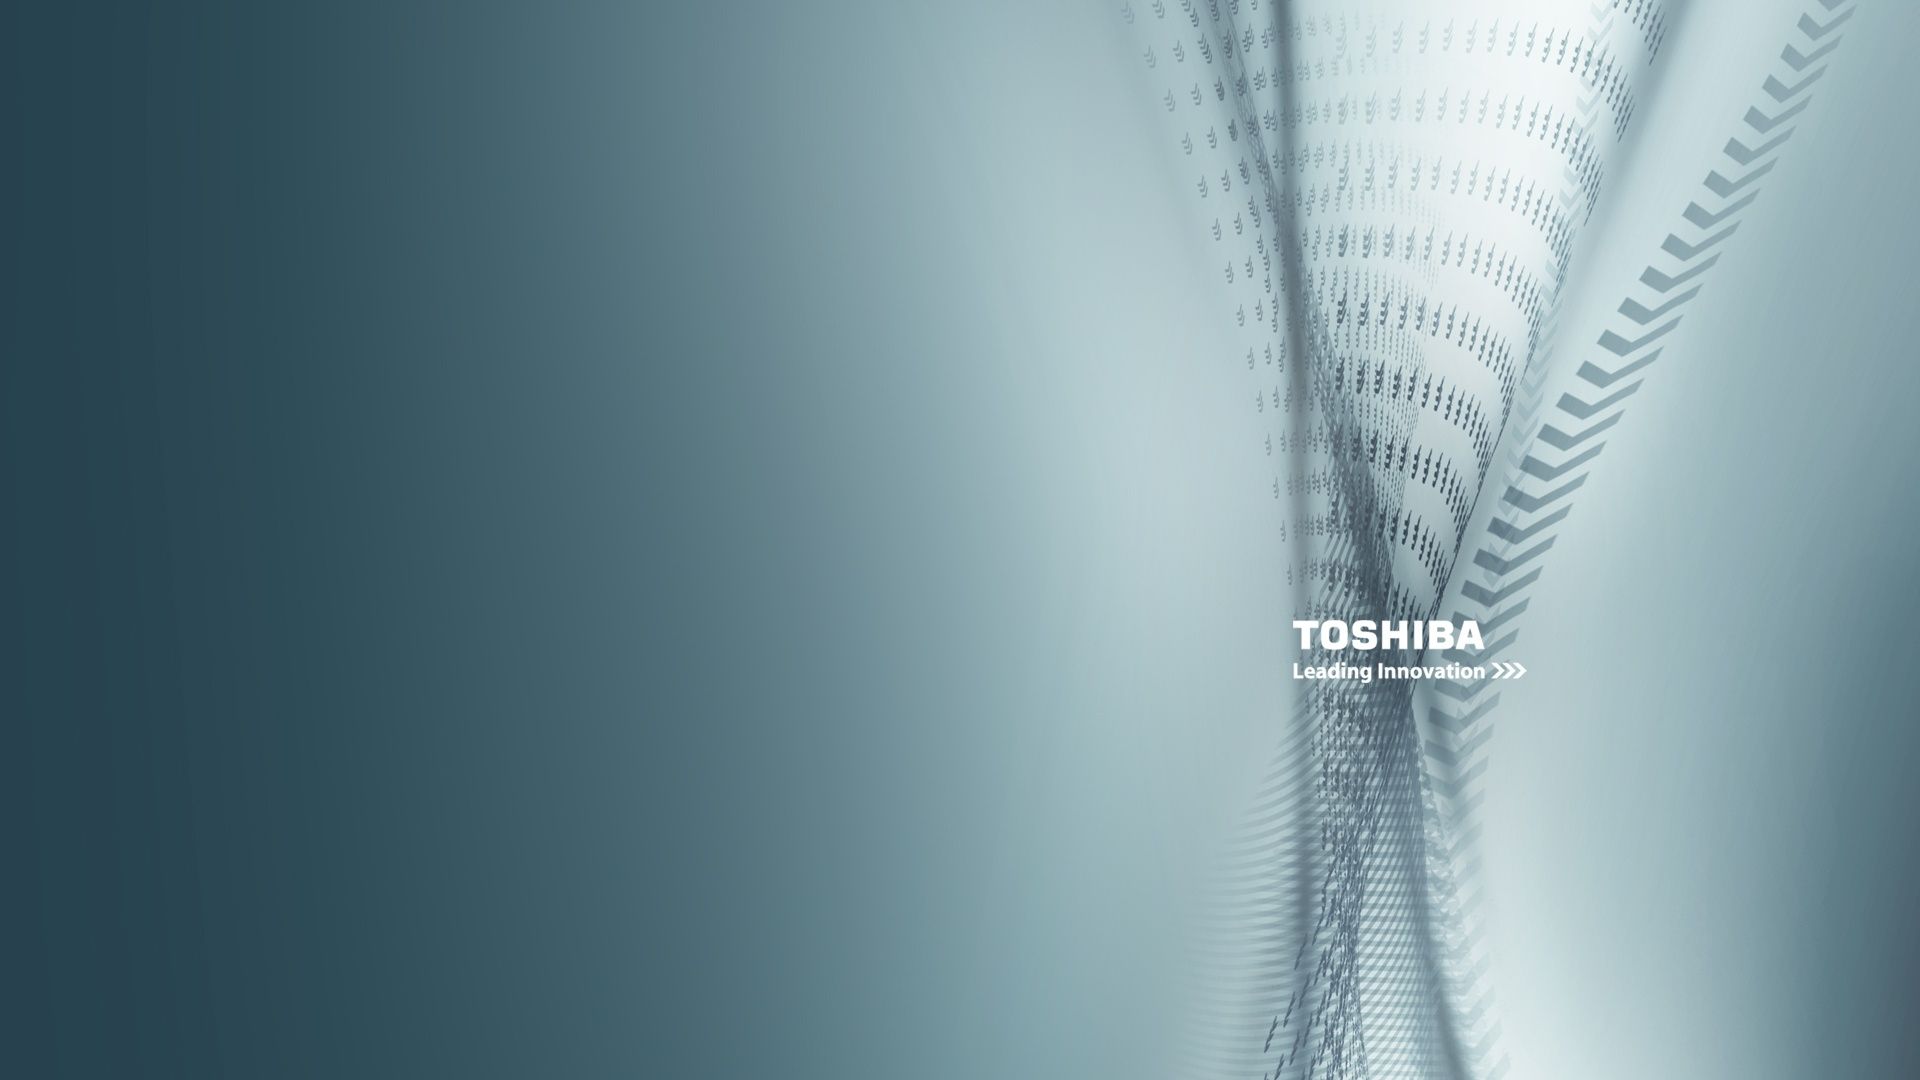 Toshiba HD Wallpapers Full HD Pictures